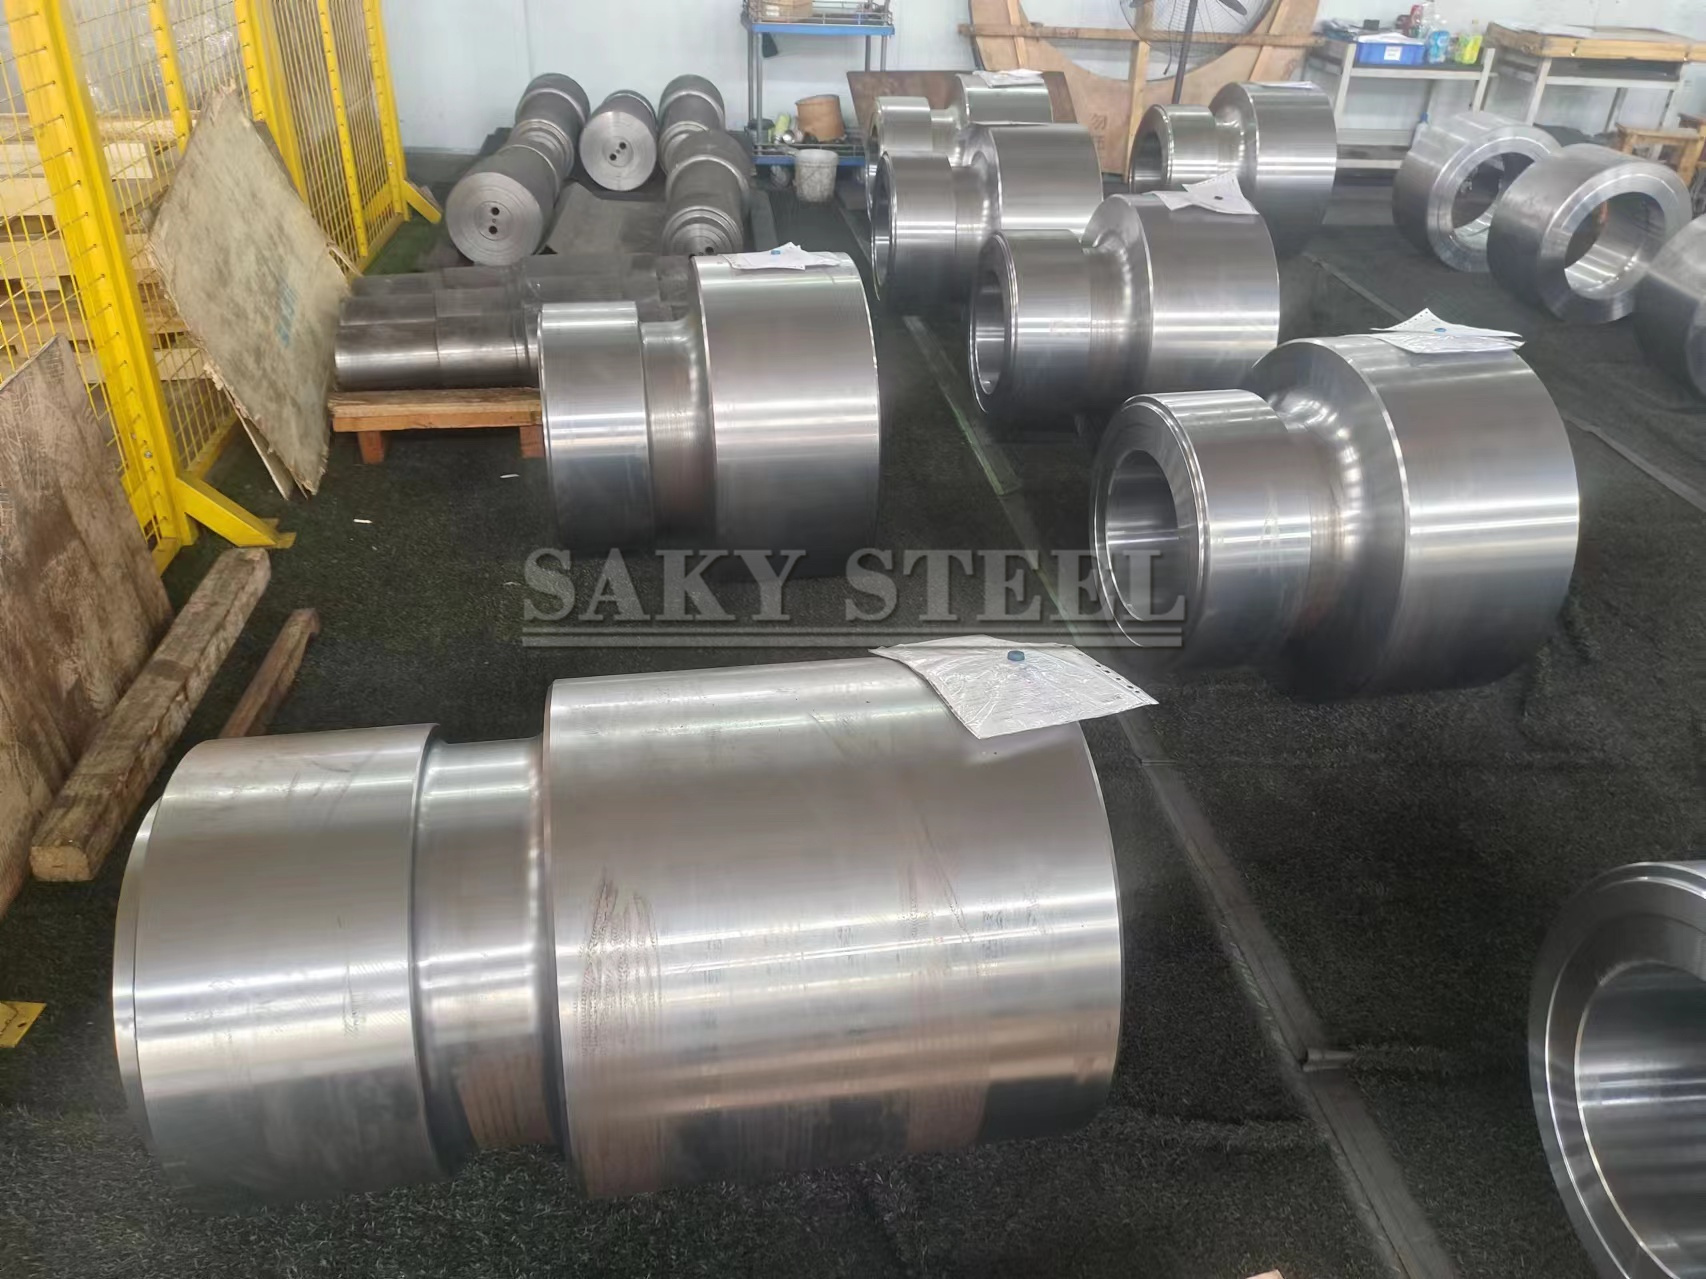 Linear motion shafting